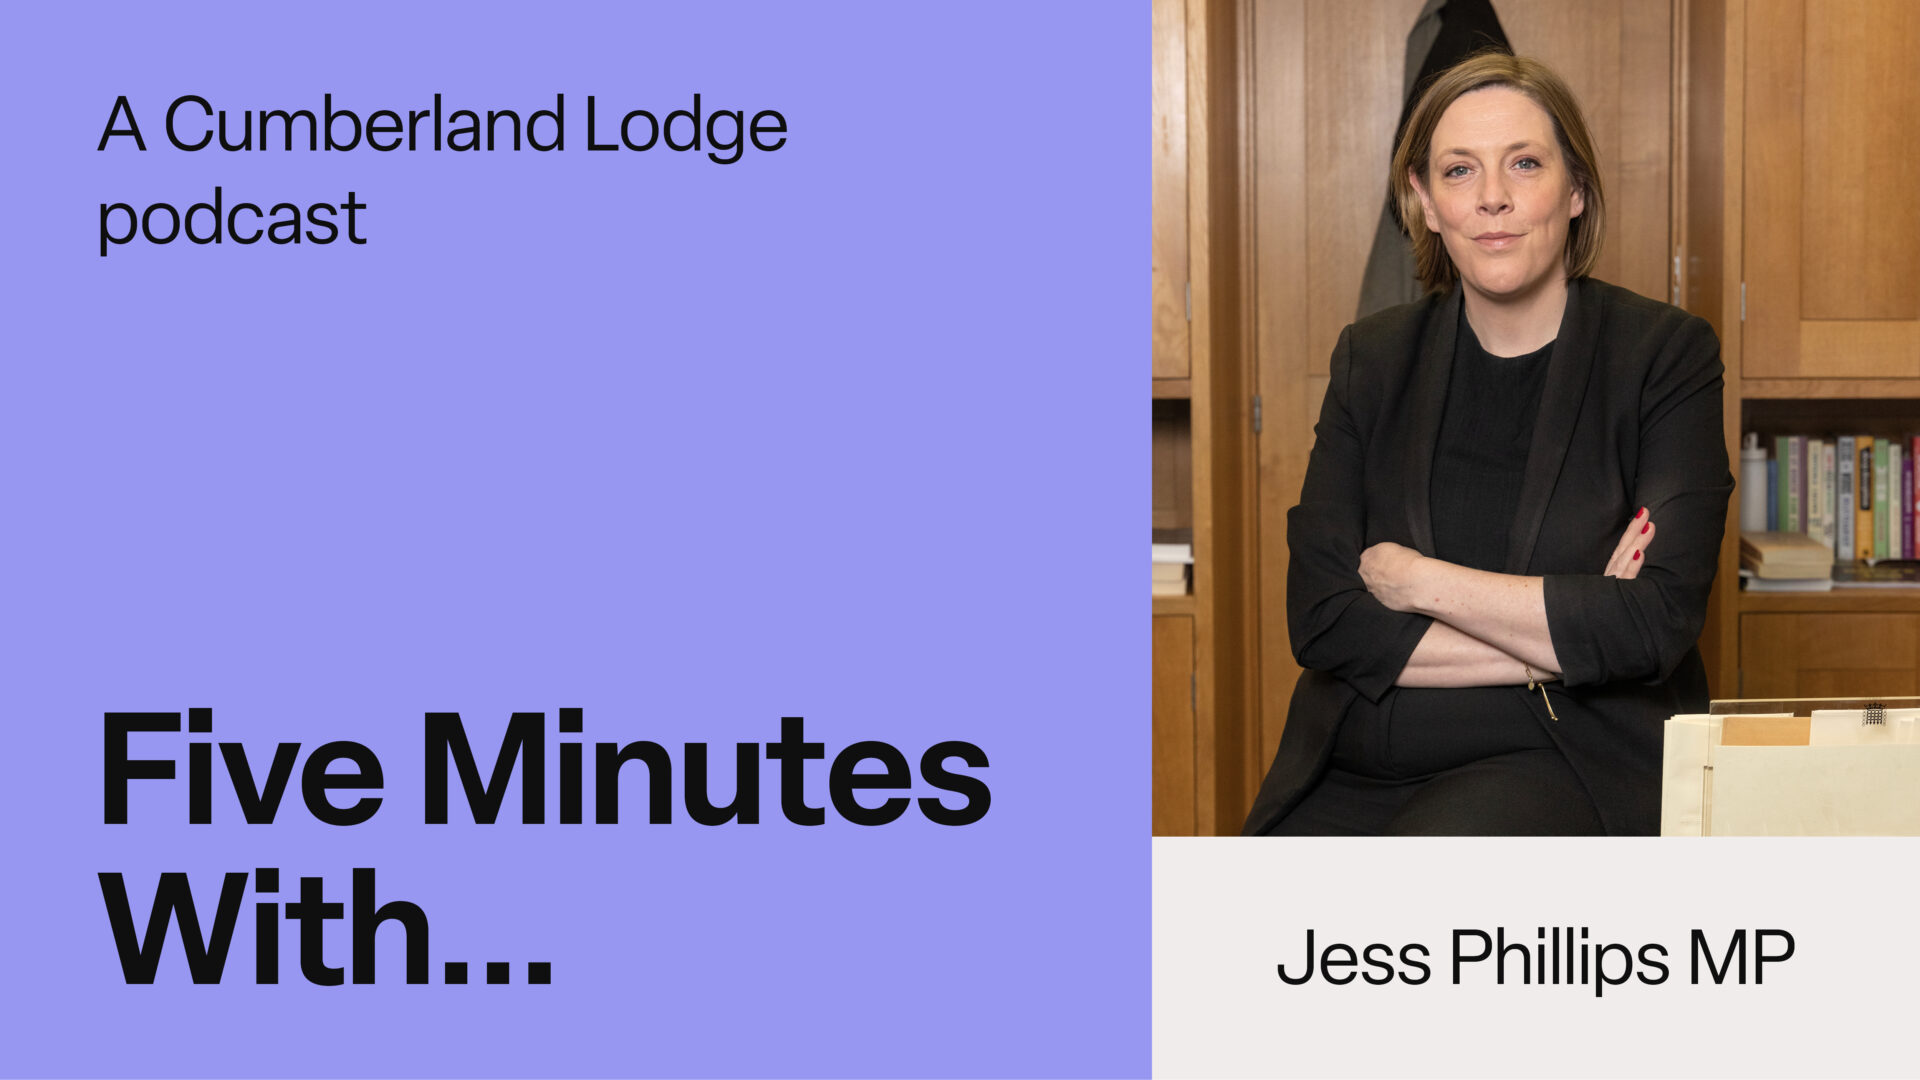 TEXT: A Cumberland Lodge podcast. Five Minutes With... Jess Phillips MP